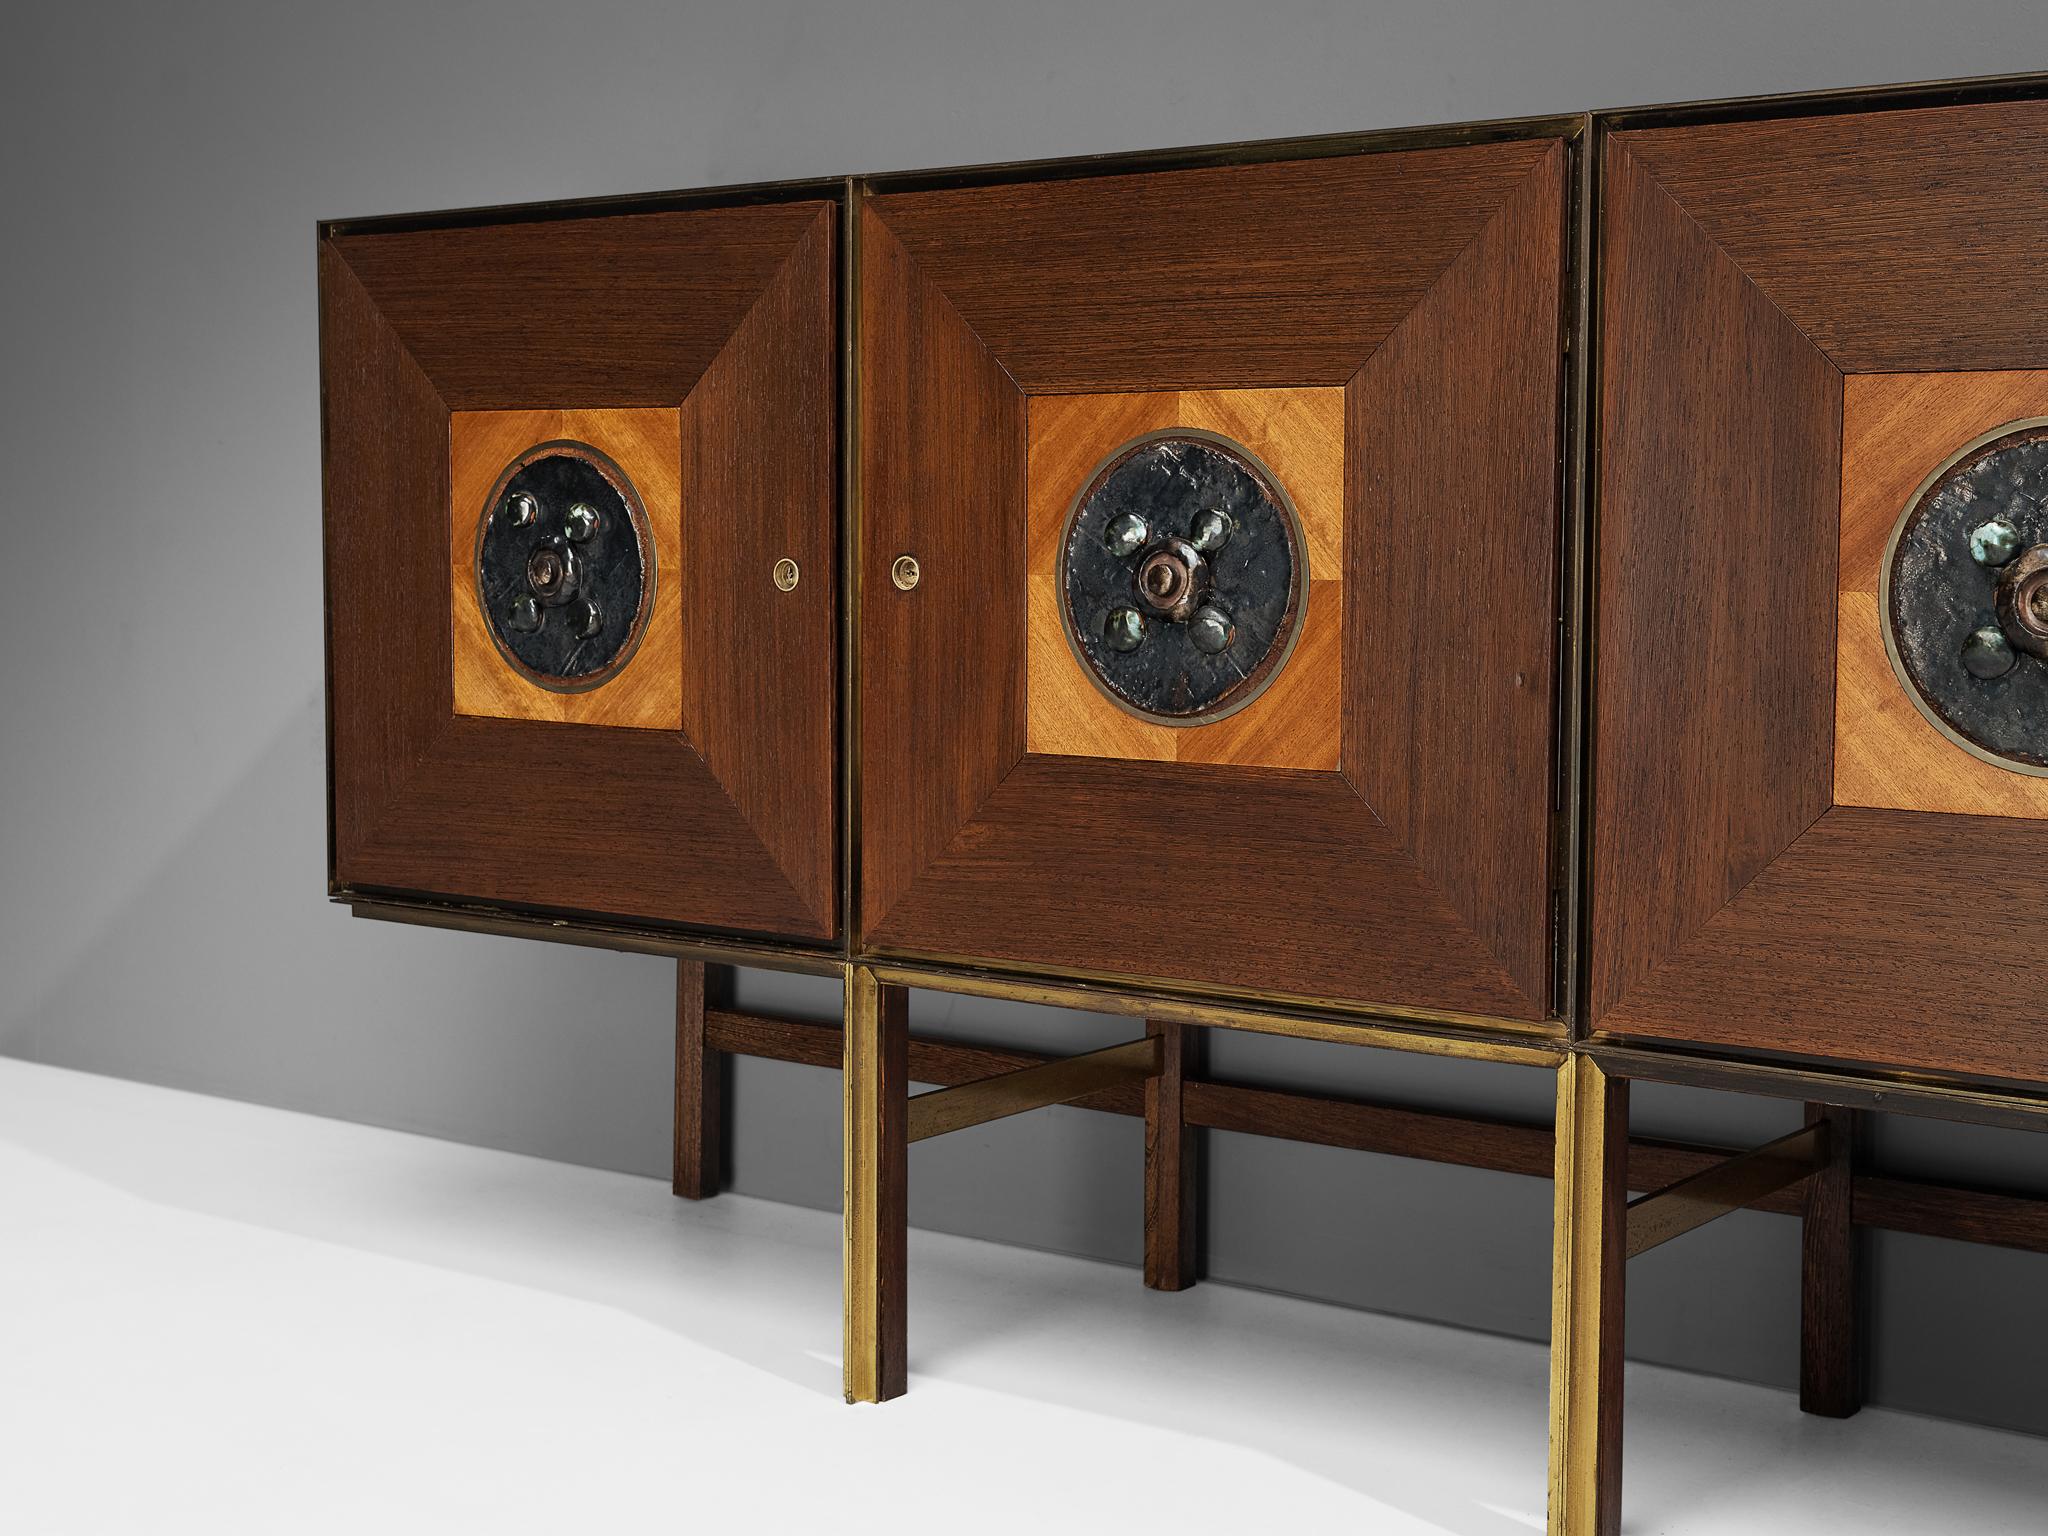 Exceptional Flemish Sideboard in Wenge and Ceramics 3